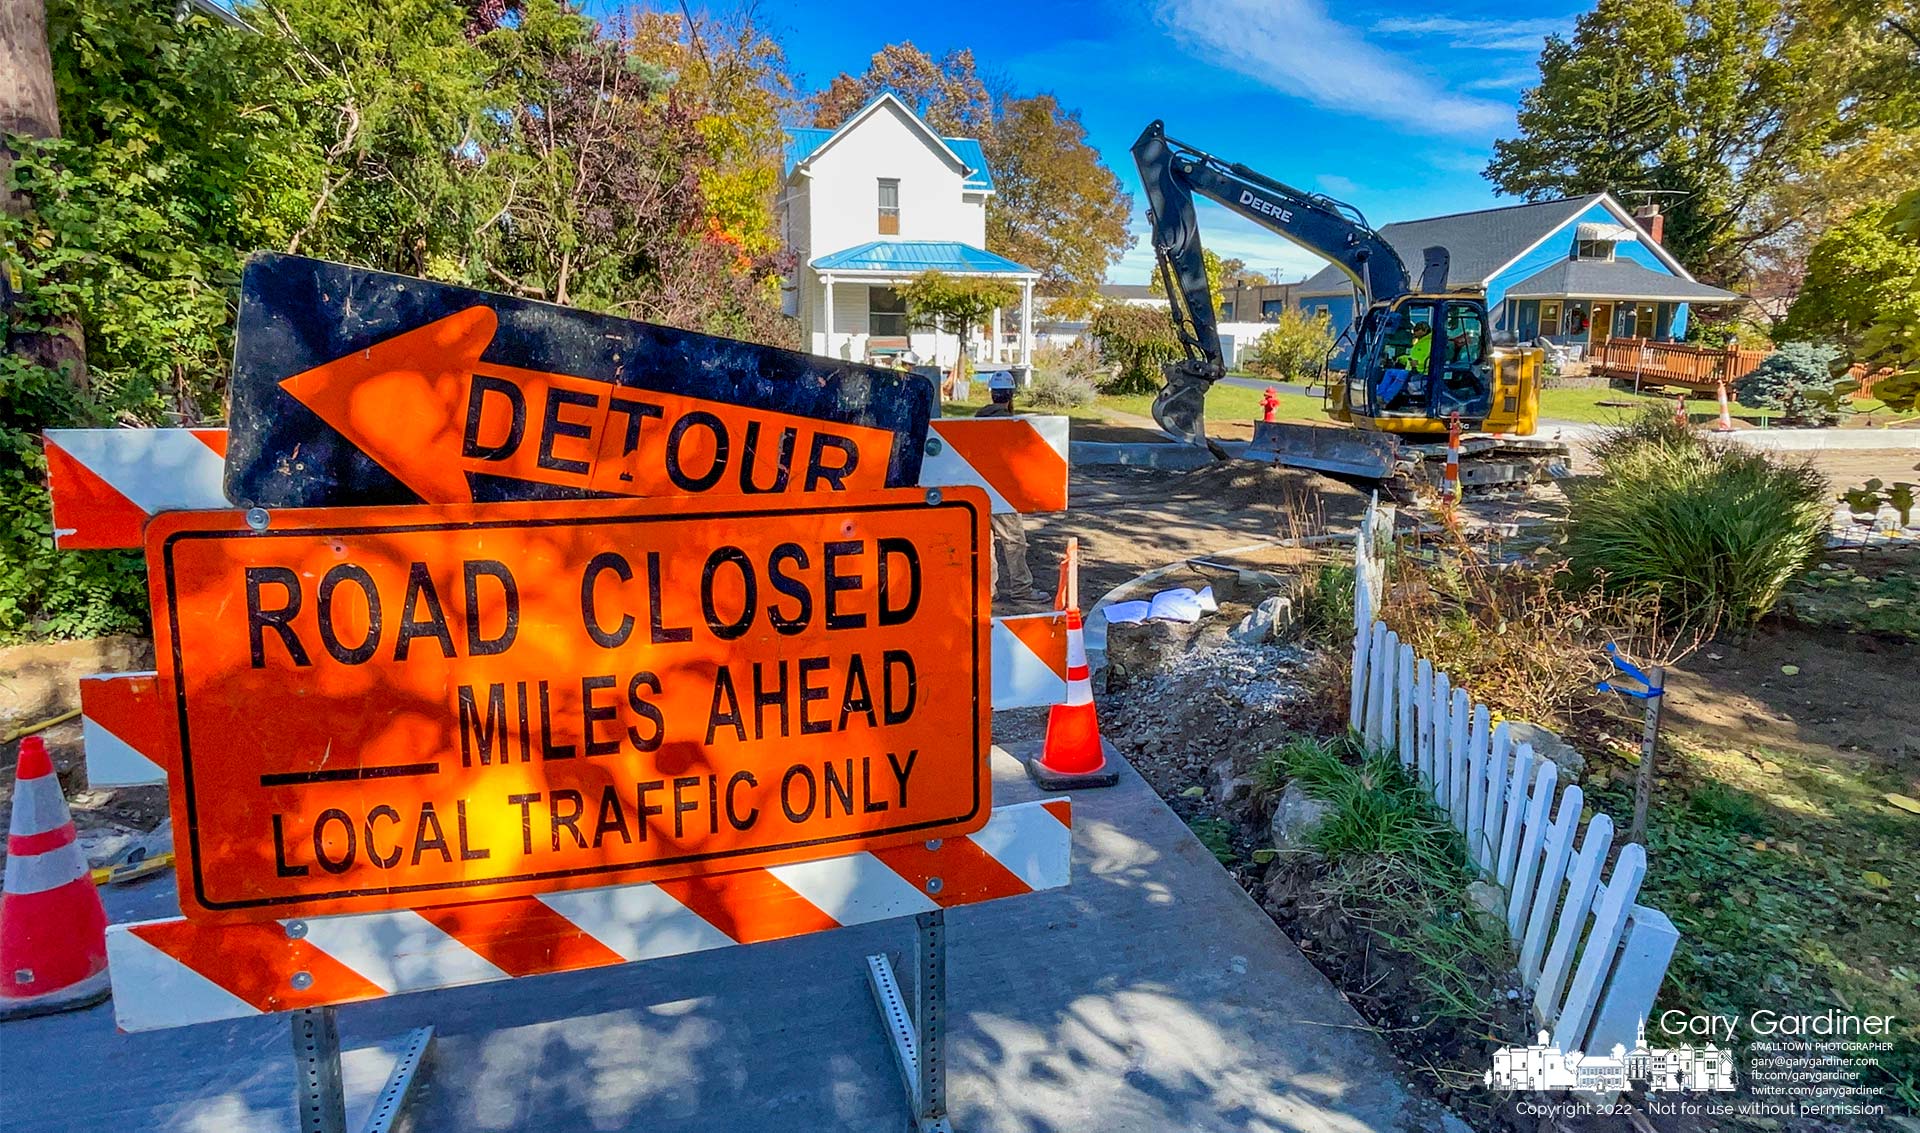 There's no way to go home from this alley at the end of East Home Street where a contractor is preparing the roadway for repaving as part of the upgrade of Home and its connecting alleys. My Final Photo for October 20, 2022.